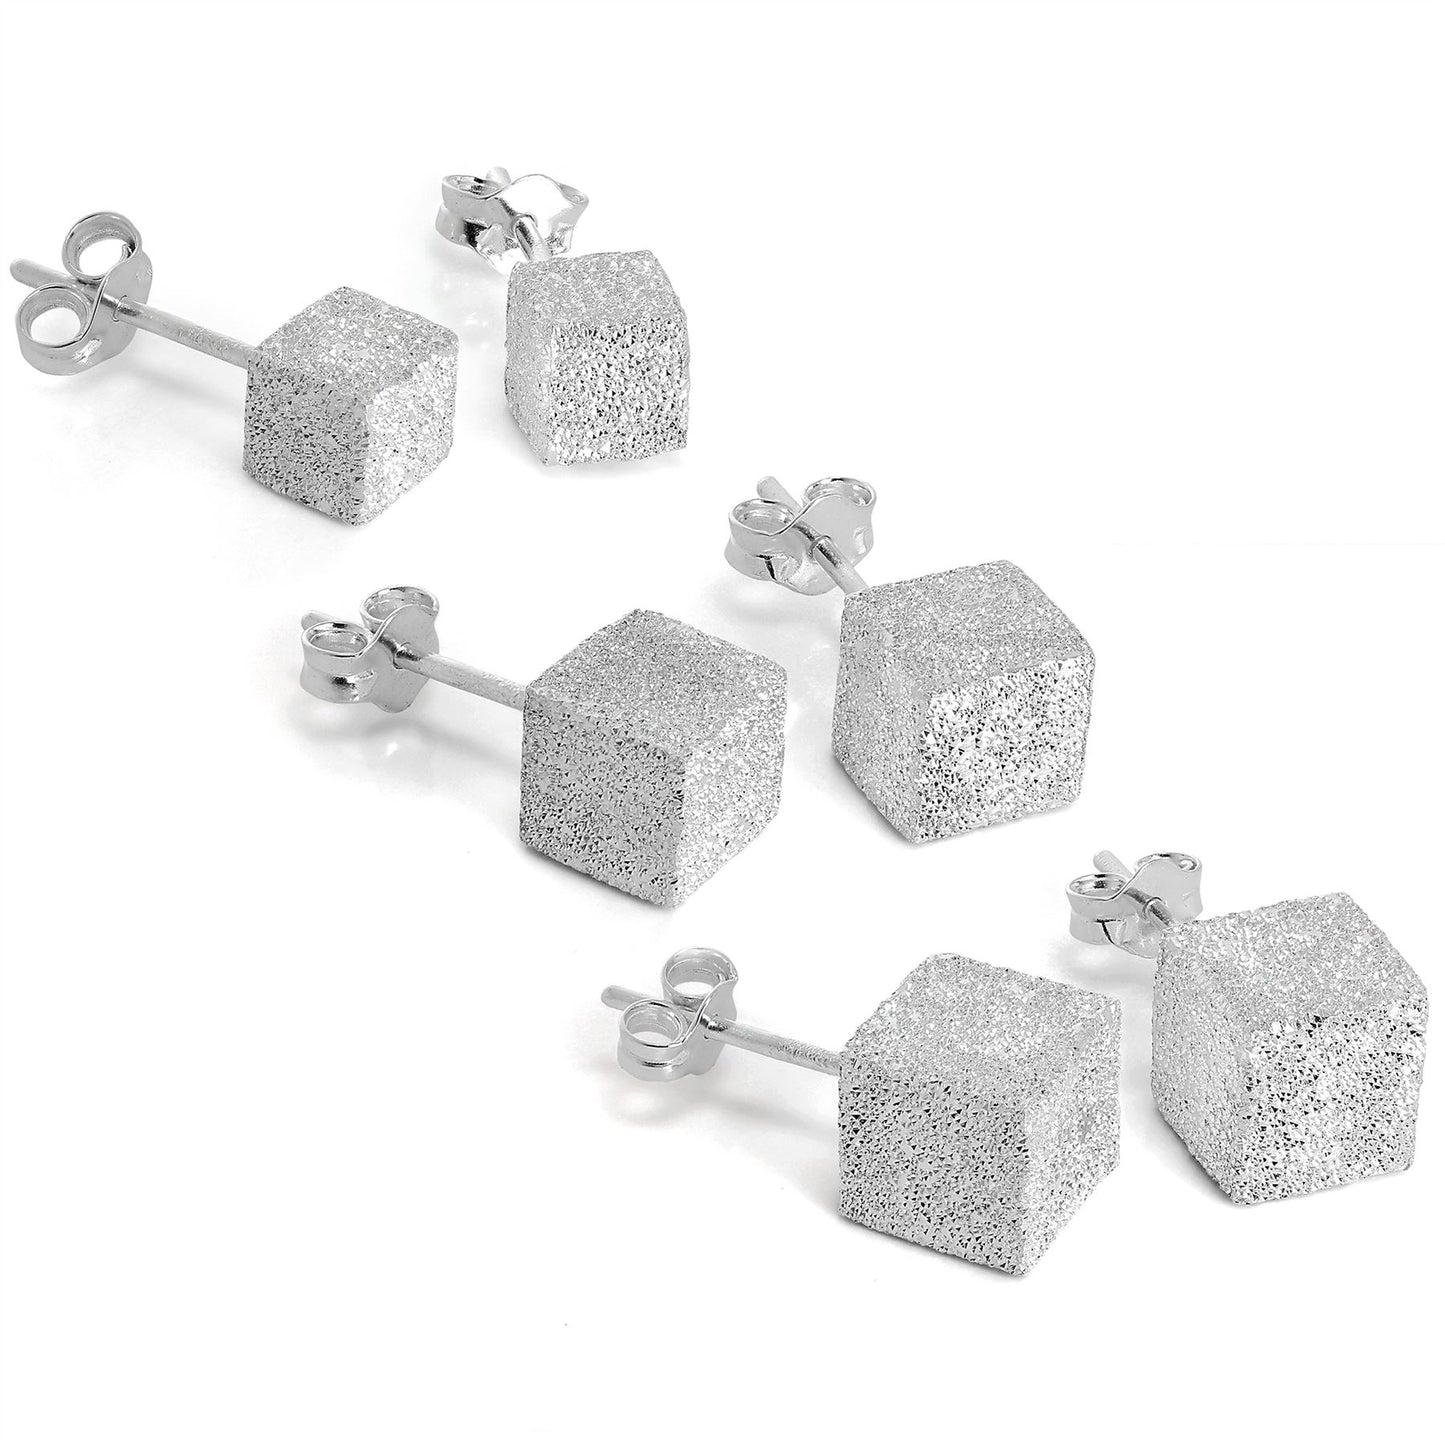 Frosted Sterling Silver Cube Stud Earrings 5mm - 7mm